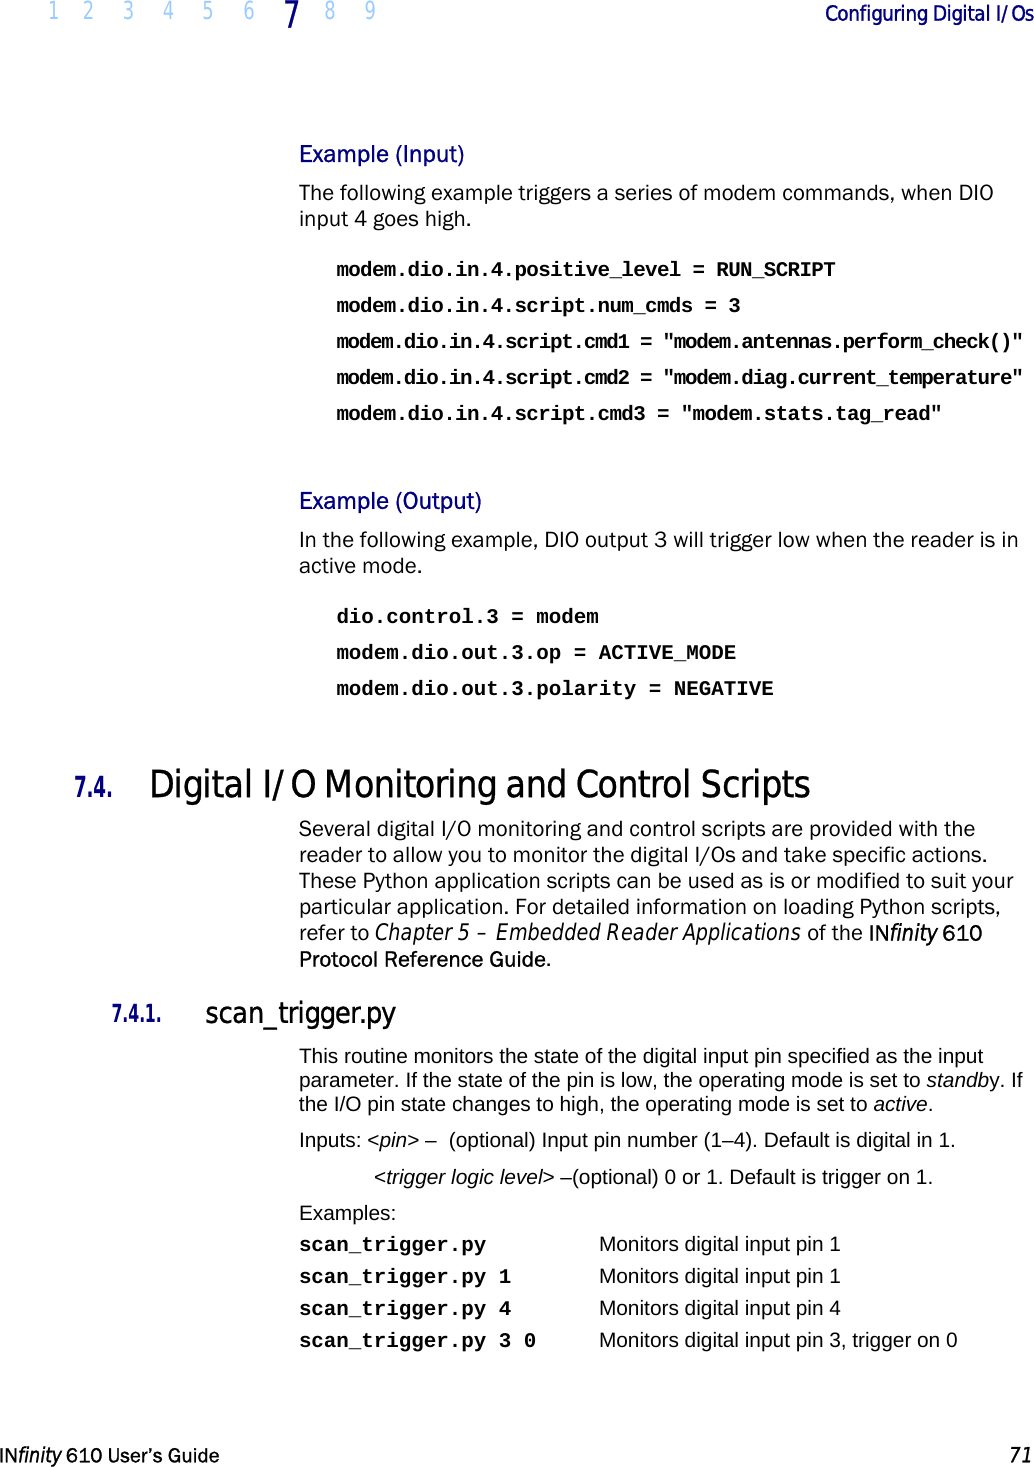  1 2 3 4 5 6 7  8 9        Configuring Digital I/Os   INfinity 610 User’s Guide  71  Example (Input) The following example triggers a series of modem commands, when DIO input 4 goes high. modem.dio.in.4.positive_level = RUN_SCRIPT modem.dio.in.4.script.num_cmds = 3 modem.dio.in.4.script.cmd1 = &quot;modem.antennas.perform_check()&quot; modem.dio.in.4.script.cmd2 = &quot;modem.diag.current_temperature&quot; modem.dio.in.4.script.cmd3 = &quot;modem.stats.tag_read&quot;  Example (Output) In the following example, DIO output 3 will trigger low when the reader is in active mode. dio.control.3 = modem modem.dio.out.3.op = ACTIVE_MODE modem.dio.out.3.polarity = NEGATIVE  7.4. Digital I/O Monitoring and Control Scripts Several digital I/O monitoring and control scripts are provided with the reader to allow you to monitor the digital I/Os and take specific actions. These Python application scripts can be used as is or modified to suit your particular application. For detailed information on loading Python scripts, refer to Chapter 5 – Embedded Reader Applications of the INfinity 610 Protocol Reference Guide. 7.4.1. scan_trigger.py This routine monitors the state of the digital input pin specified as the input parameter. If the state of the pin is low, the operating mode is set to standby. If the I/O pin state changes to high, the operating mode is set to active. Inputs: &lt;pin&gt; –  (optional) Input pin number (1–4). Default is digital in 1.  &lt;trigger logic level&gt; –(optional) 0 or 1. Default is trigger on 1. Examples: scan_trigger.py    Monitors digital input pin 1 scan_trigger.py 1    Monitors digital input pin 1 scan_trigger.py 4    Monitors digital input pin 4 scan_trigger.py 3 0  Monitors digital input pin 3, trigger on 0 